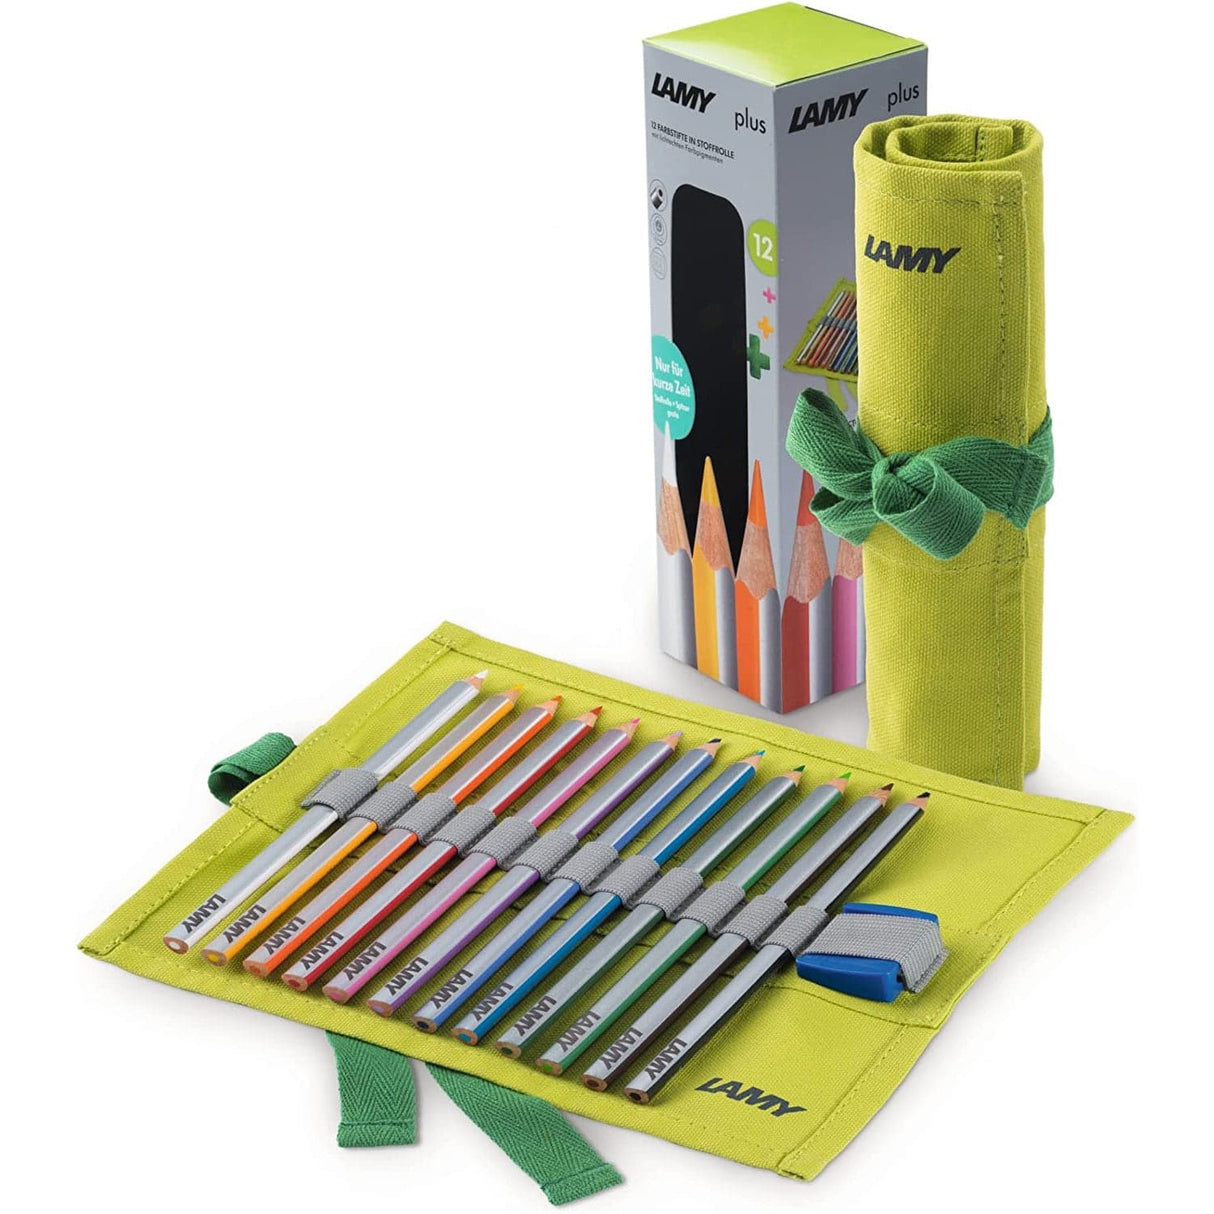 Lamy Plus Colored Pencils with Green Cloth Roll - Pack of 12